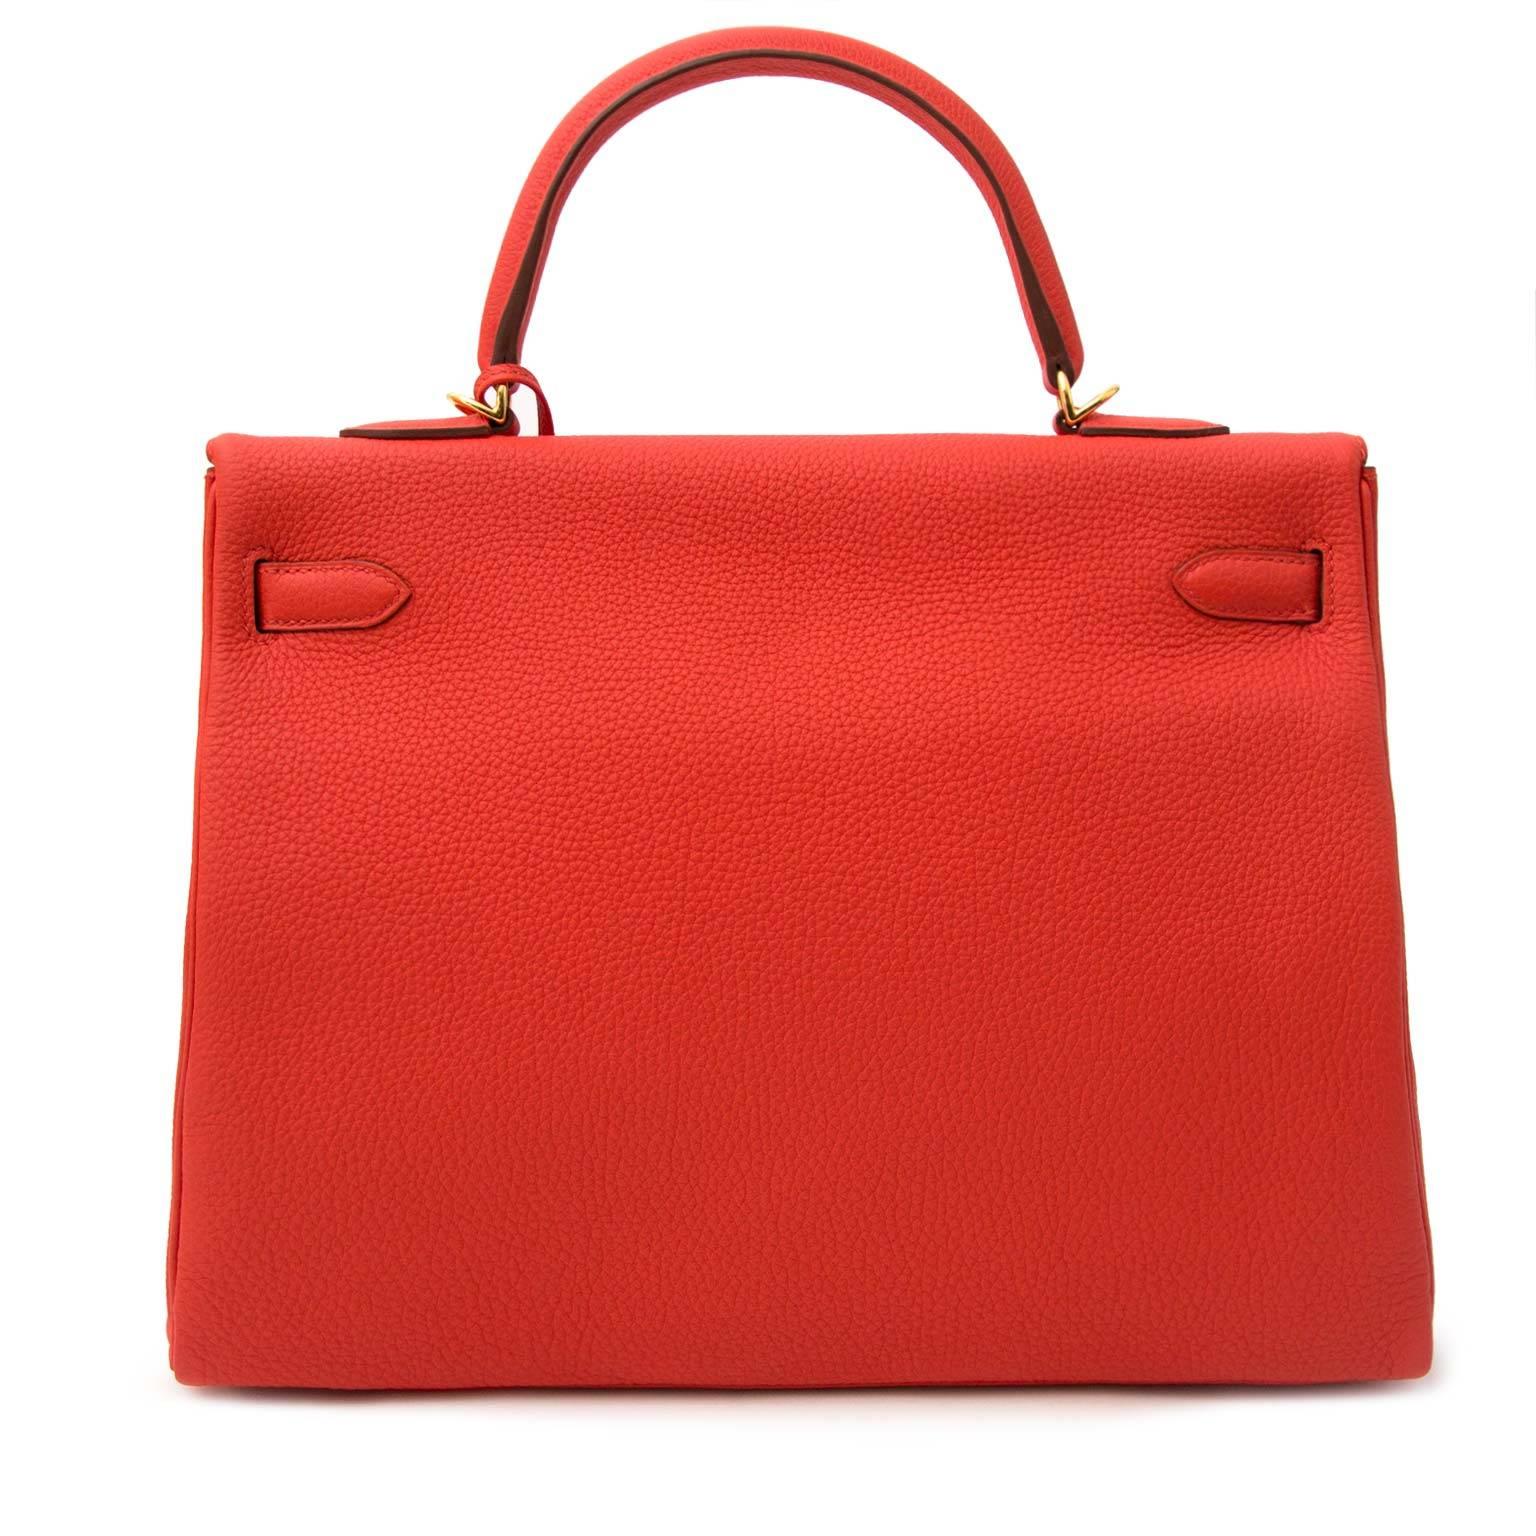 Brand new!

Hermès Kelly 35 Togo Capucine GHW + Strap

This timeless Hermès Kelly 35cm is made out of togo leather which is a very smooth and grainy leather type. The gold toned hardware accentuates the bag and gives it a chic look.

Hermès'